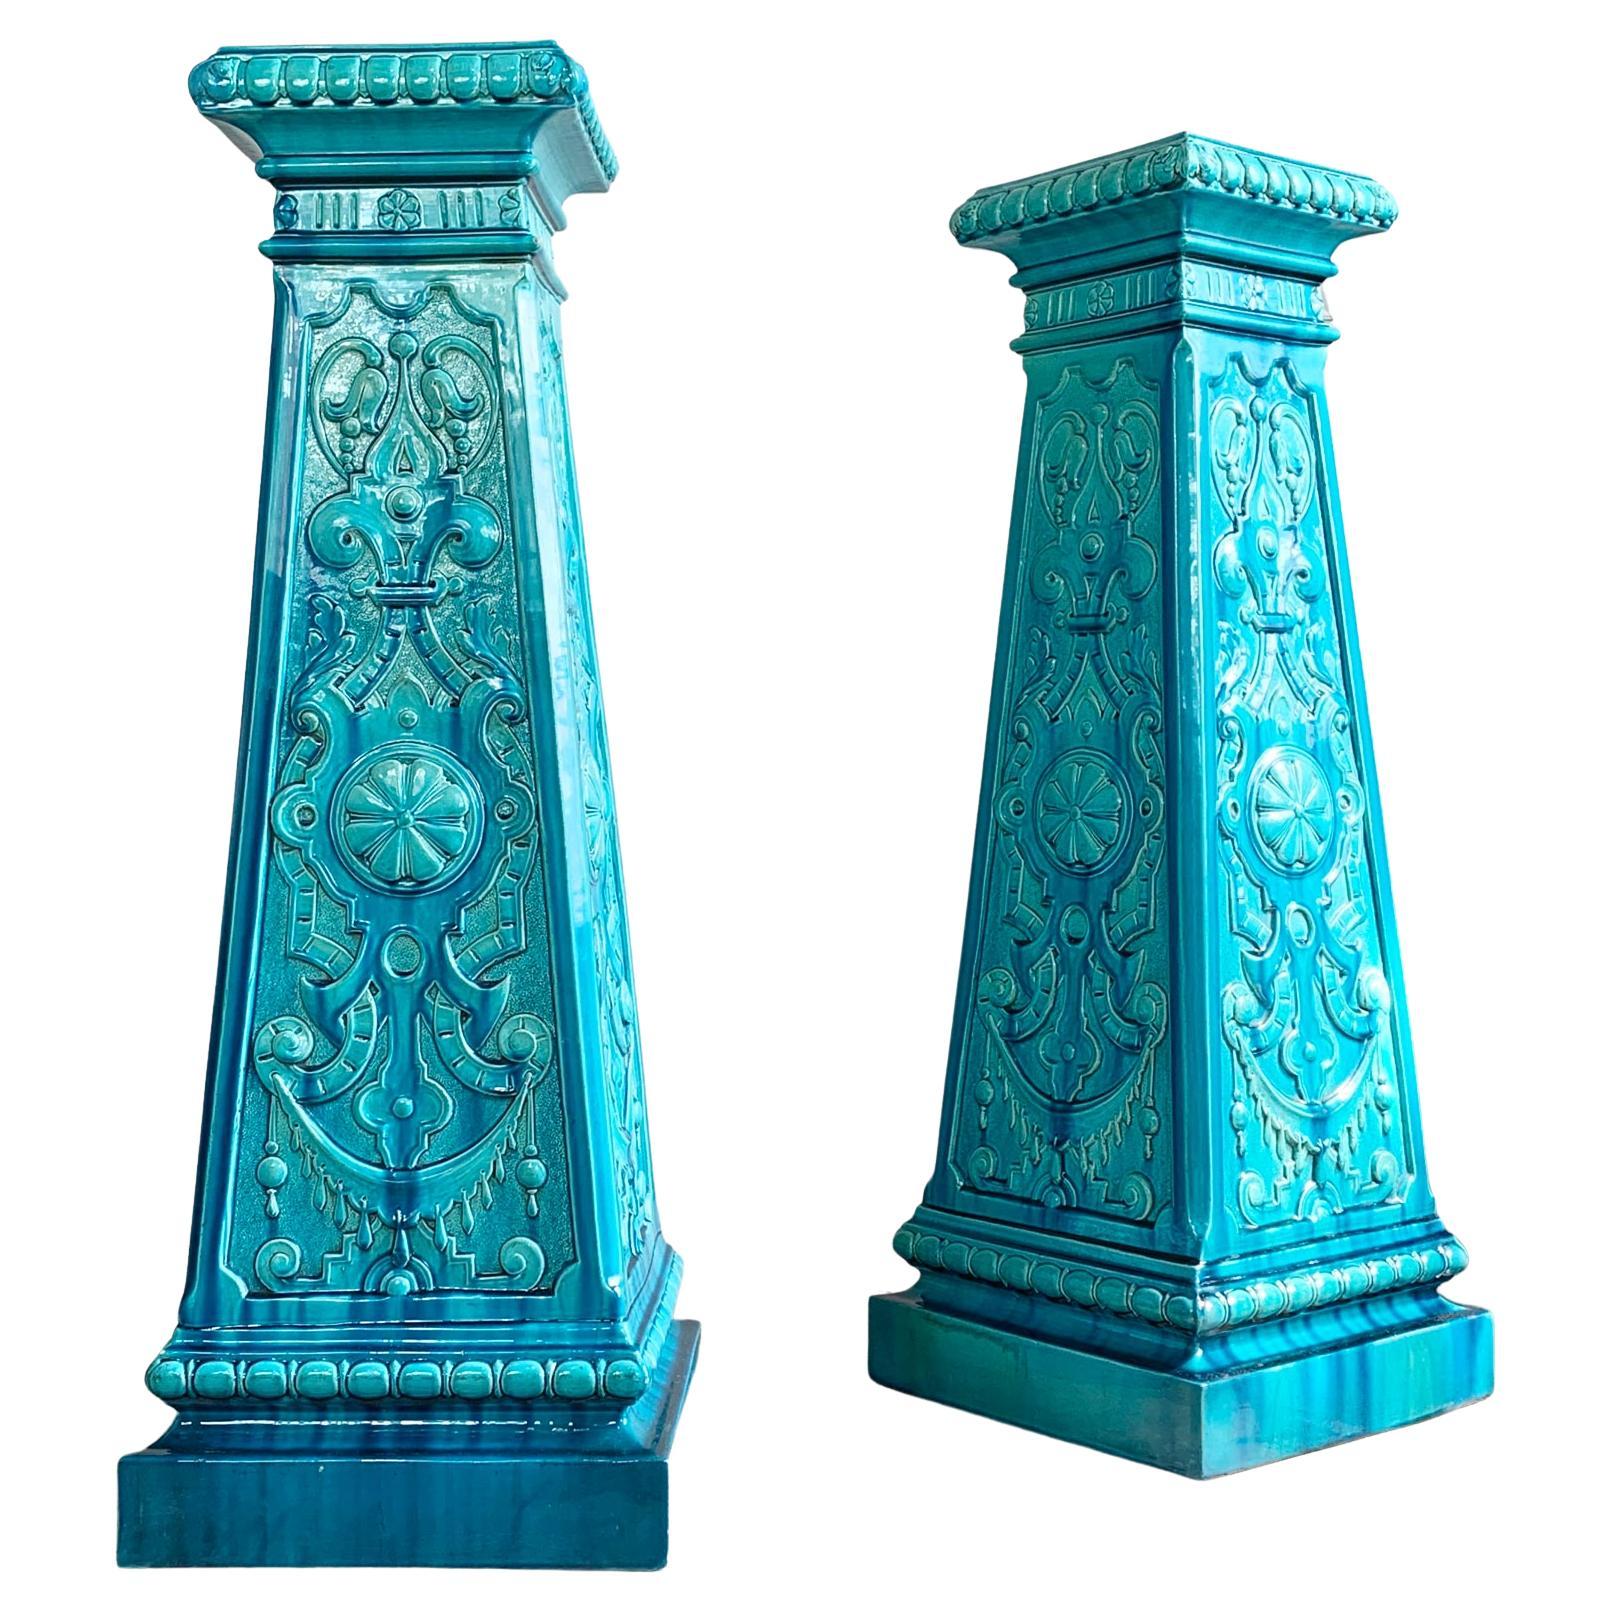  Exceptional Pair of 19th Century Burmantofts Faience Jardiniere Stands